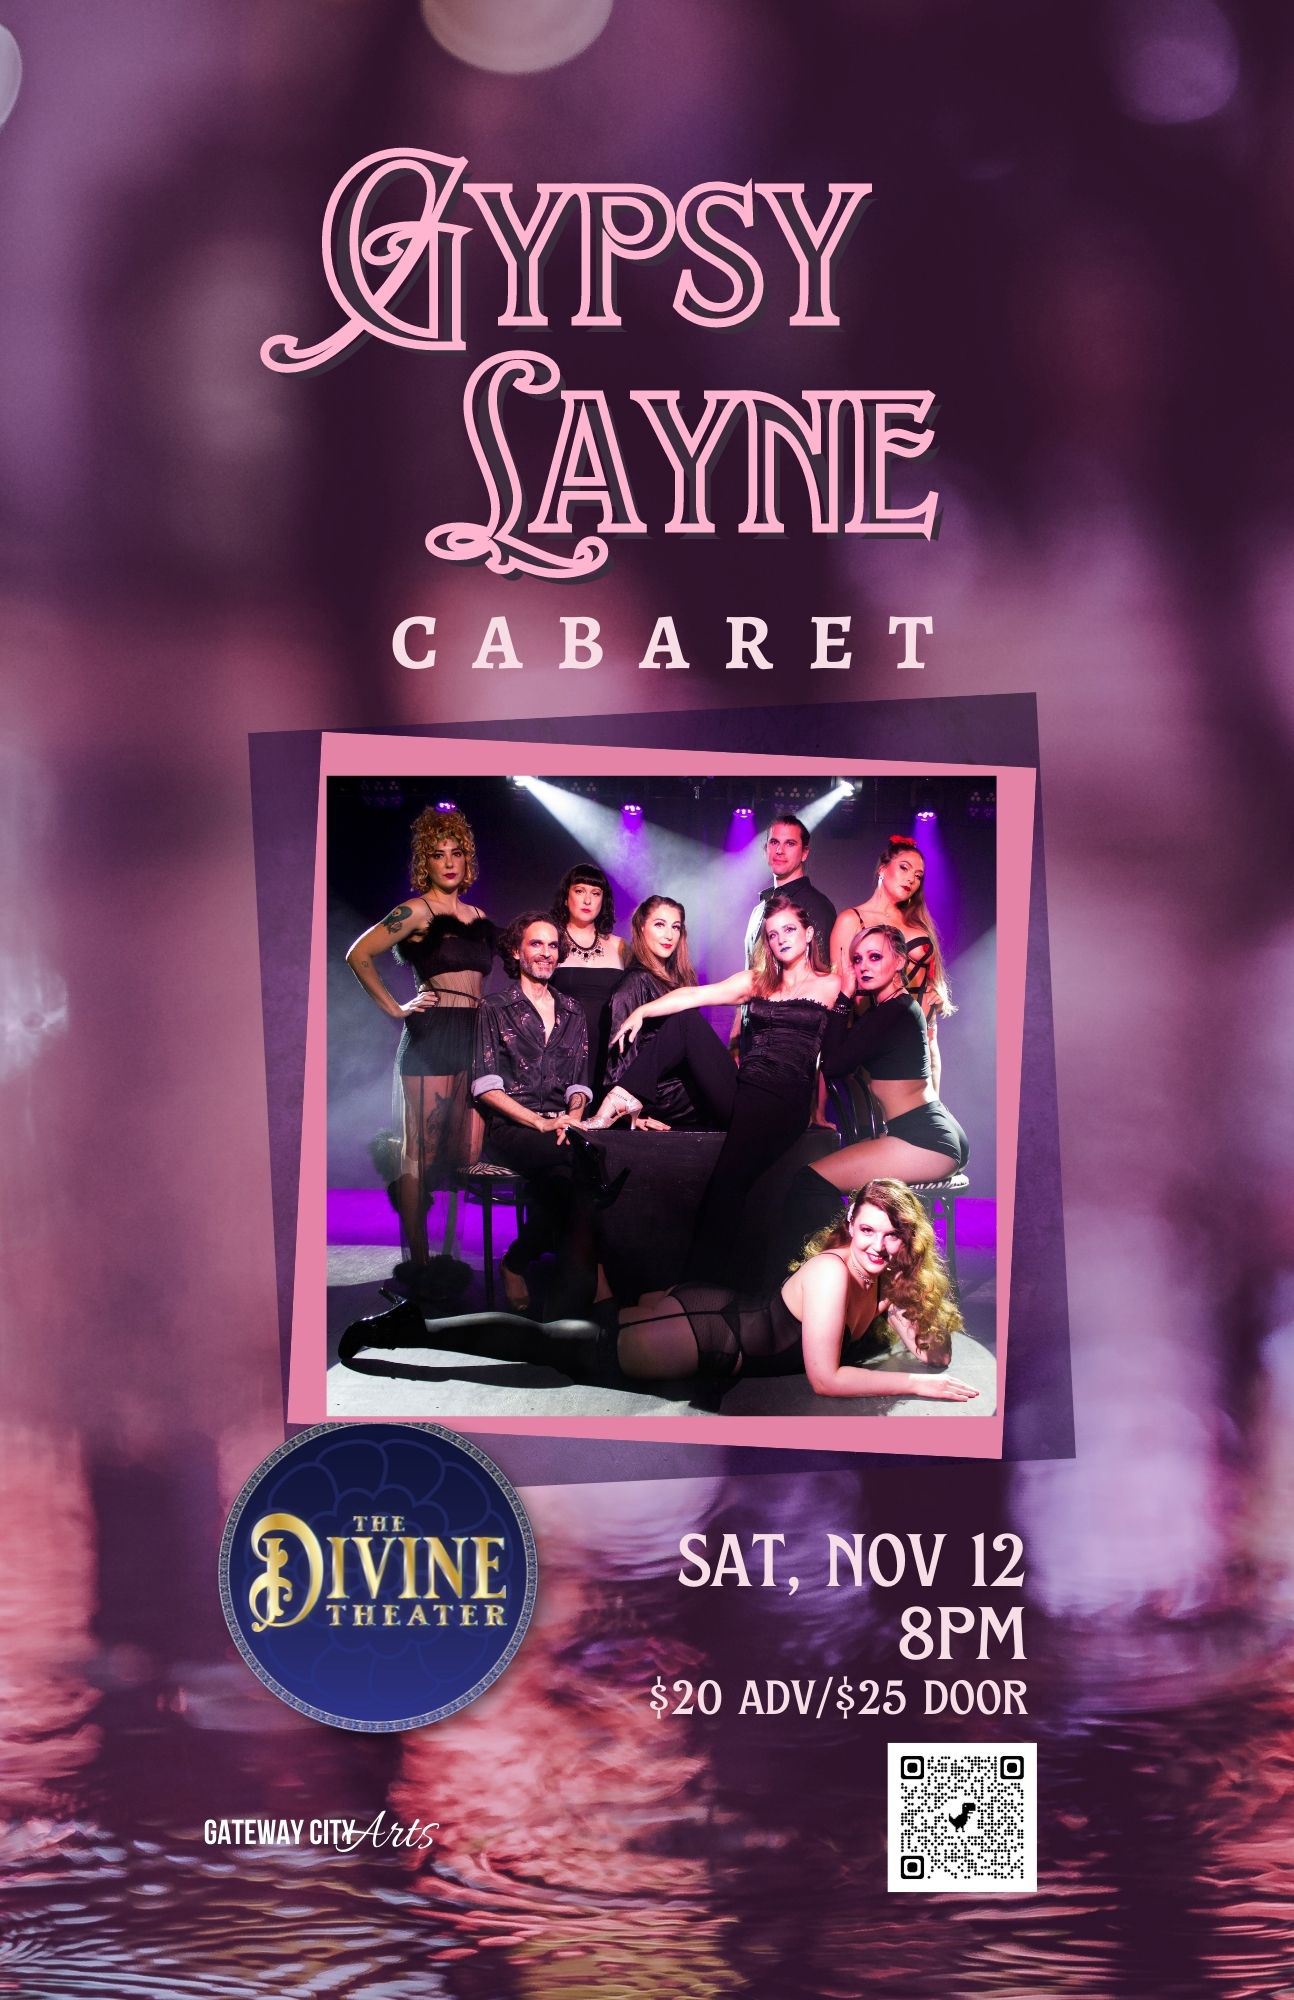 Gypsy Layne at The Divine Theater